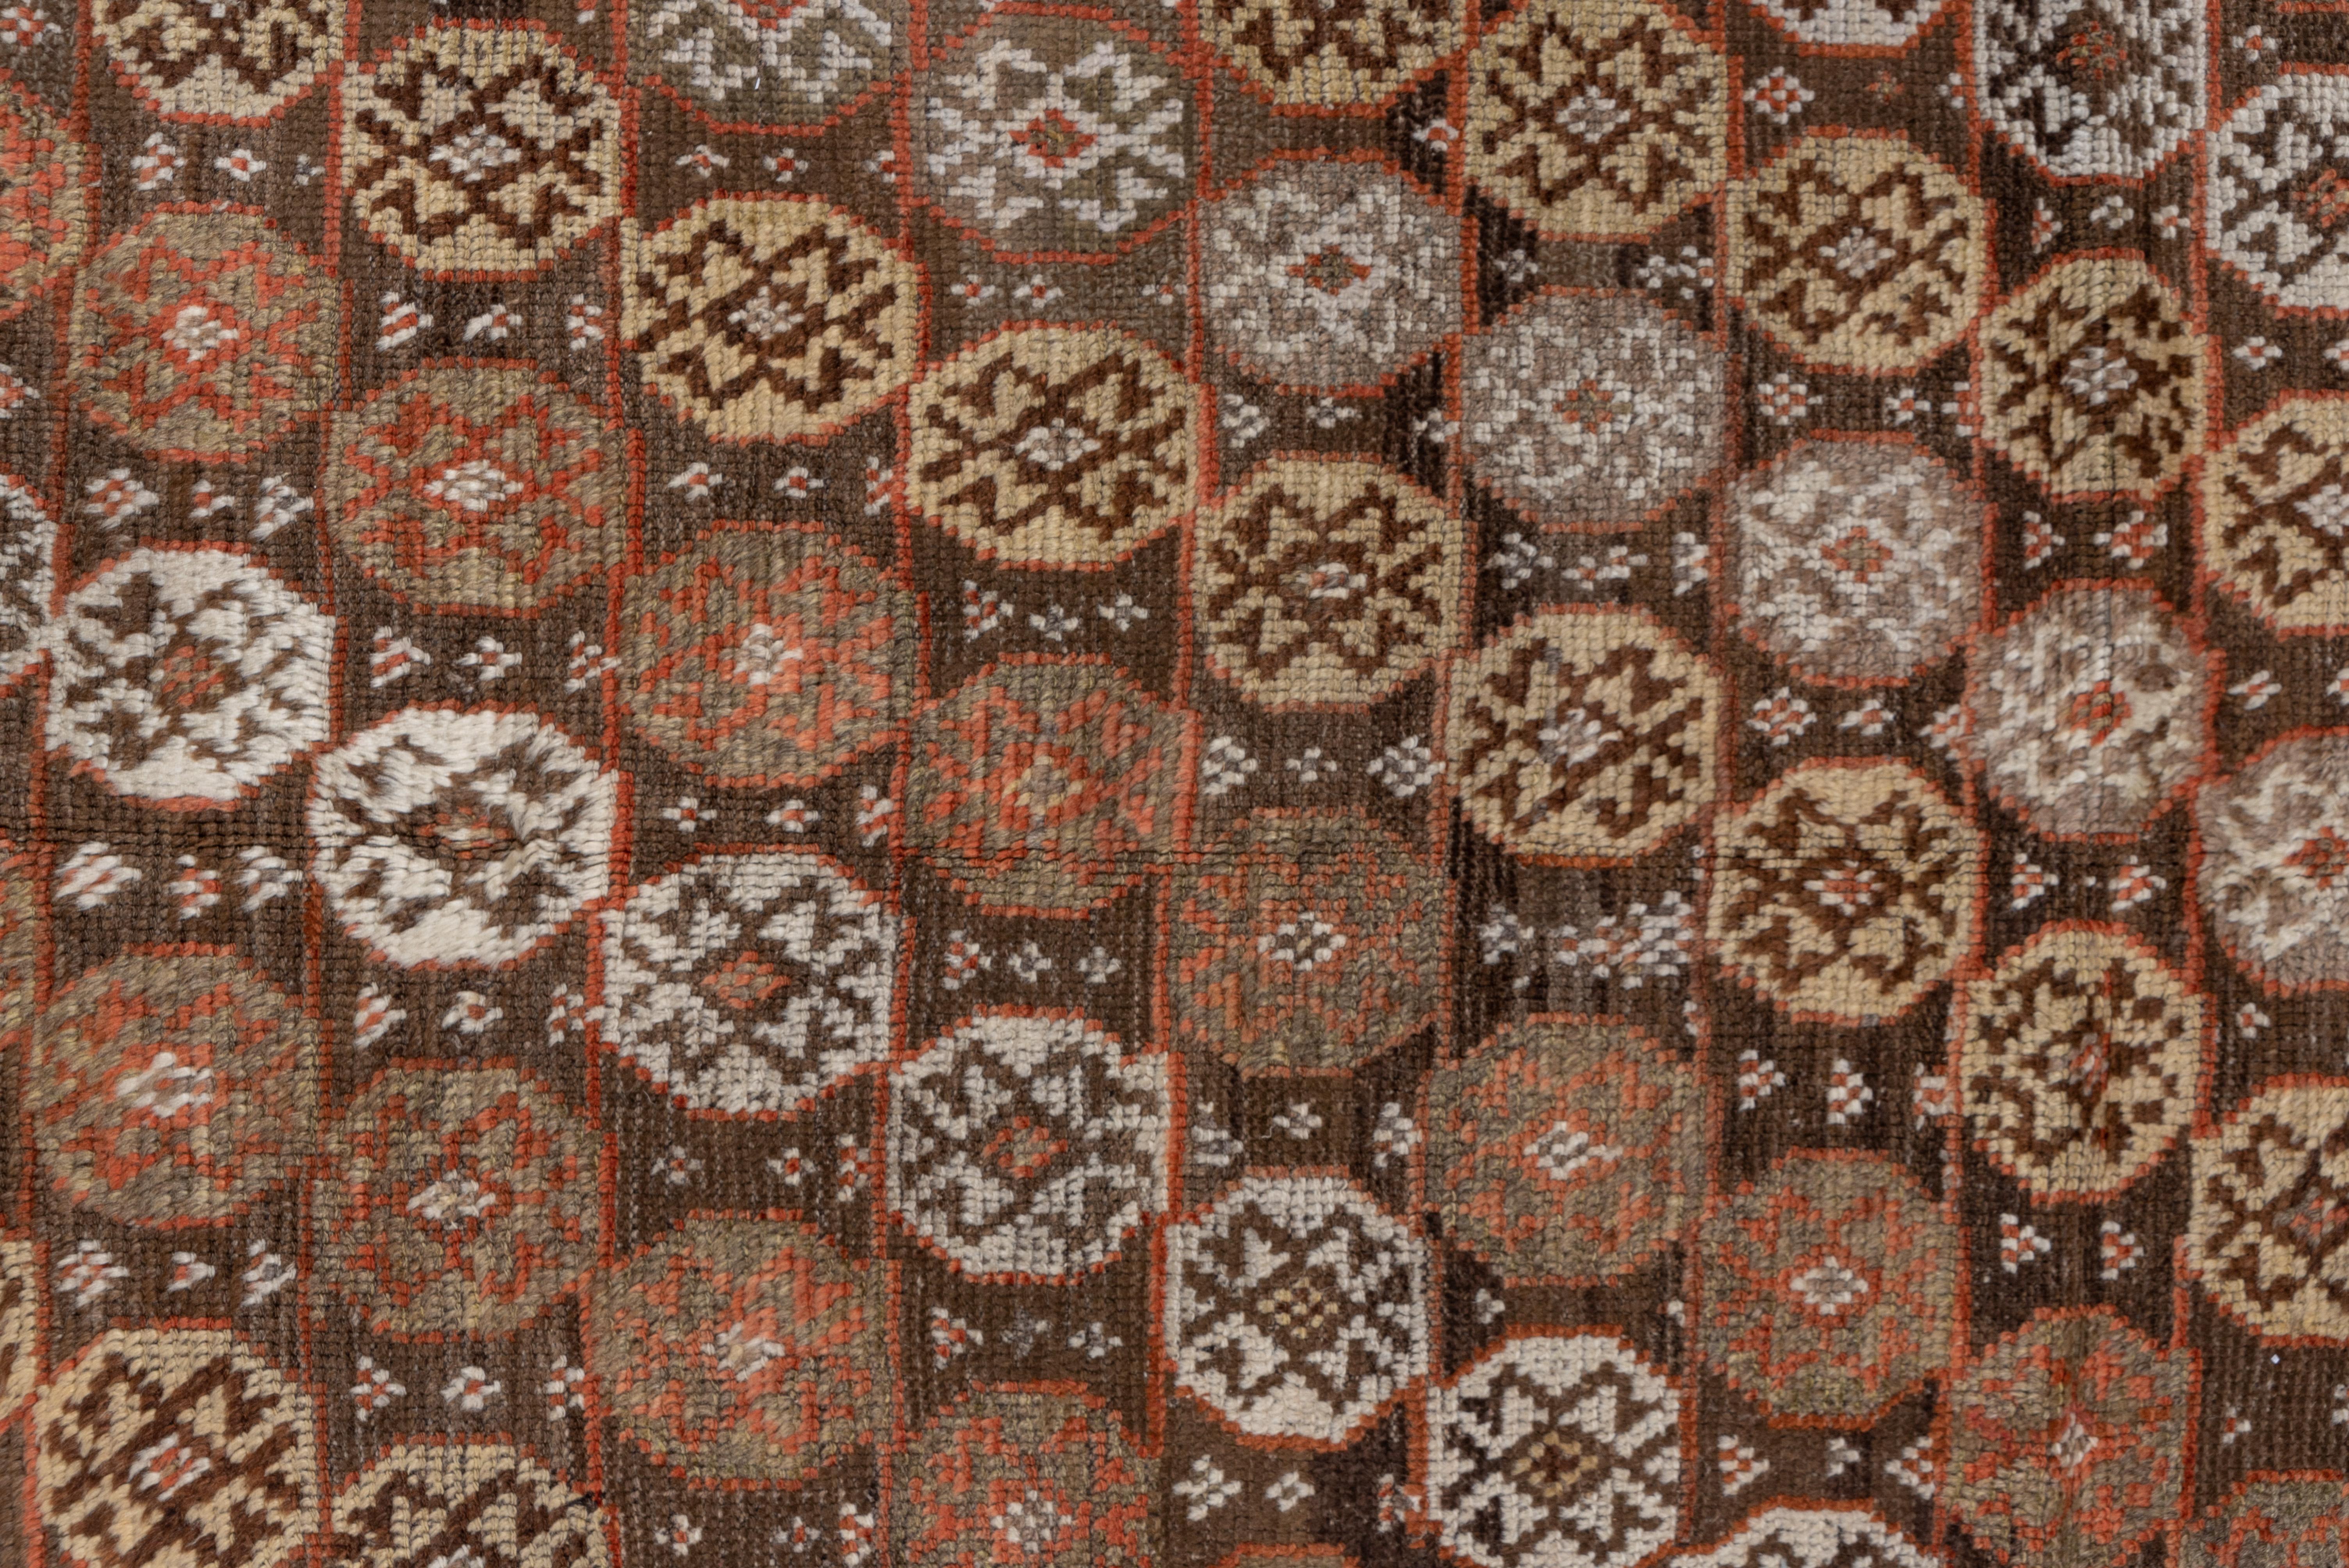 Early 20th Century Antique Tribal Persian Gabbeh Rug, Rust Brown and White Tones, Southwest Decor For Sale